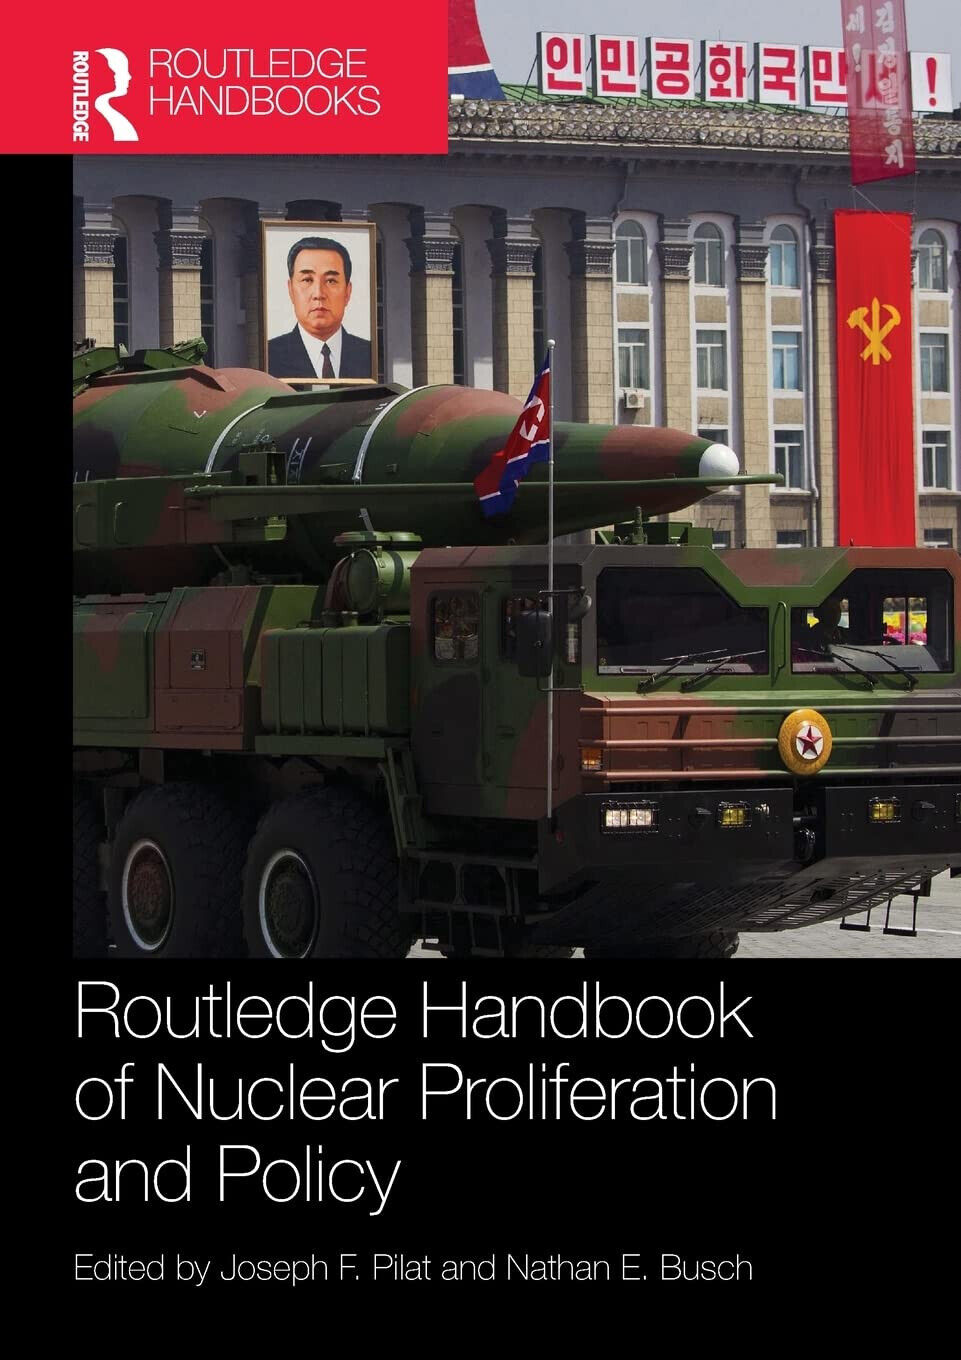 Routledge Handbook of Nuclear Proliferation and Policy - Joseph F. Pilat - 2017 libro usato